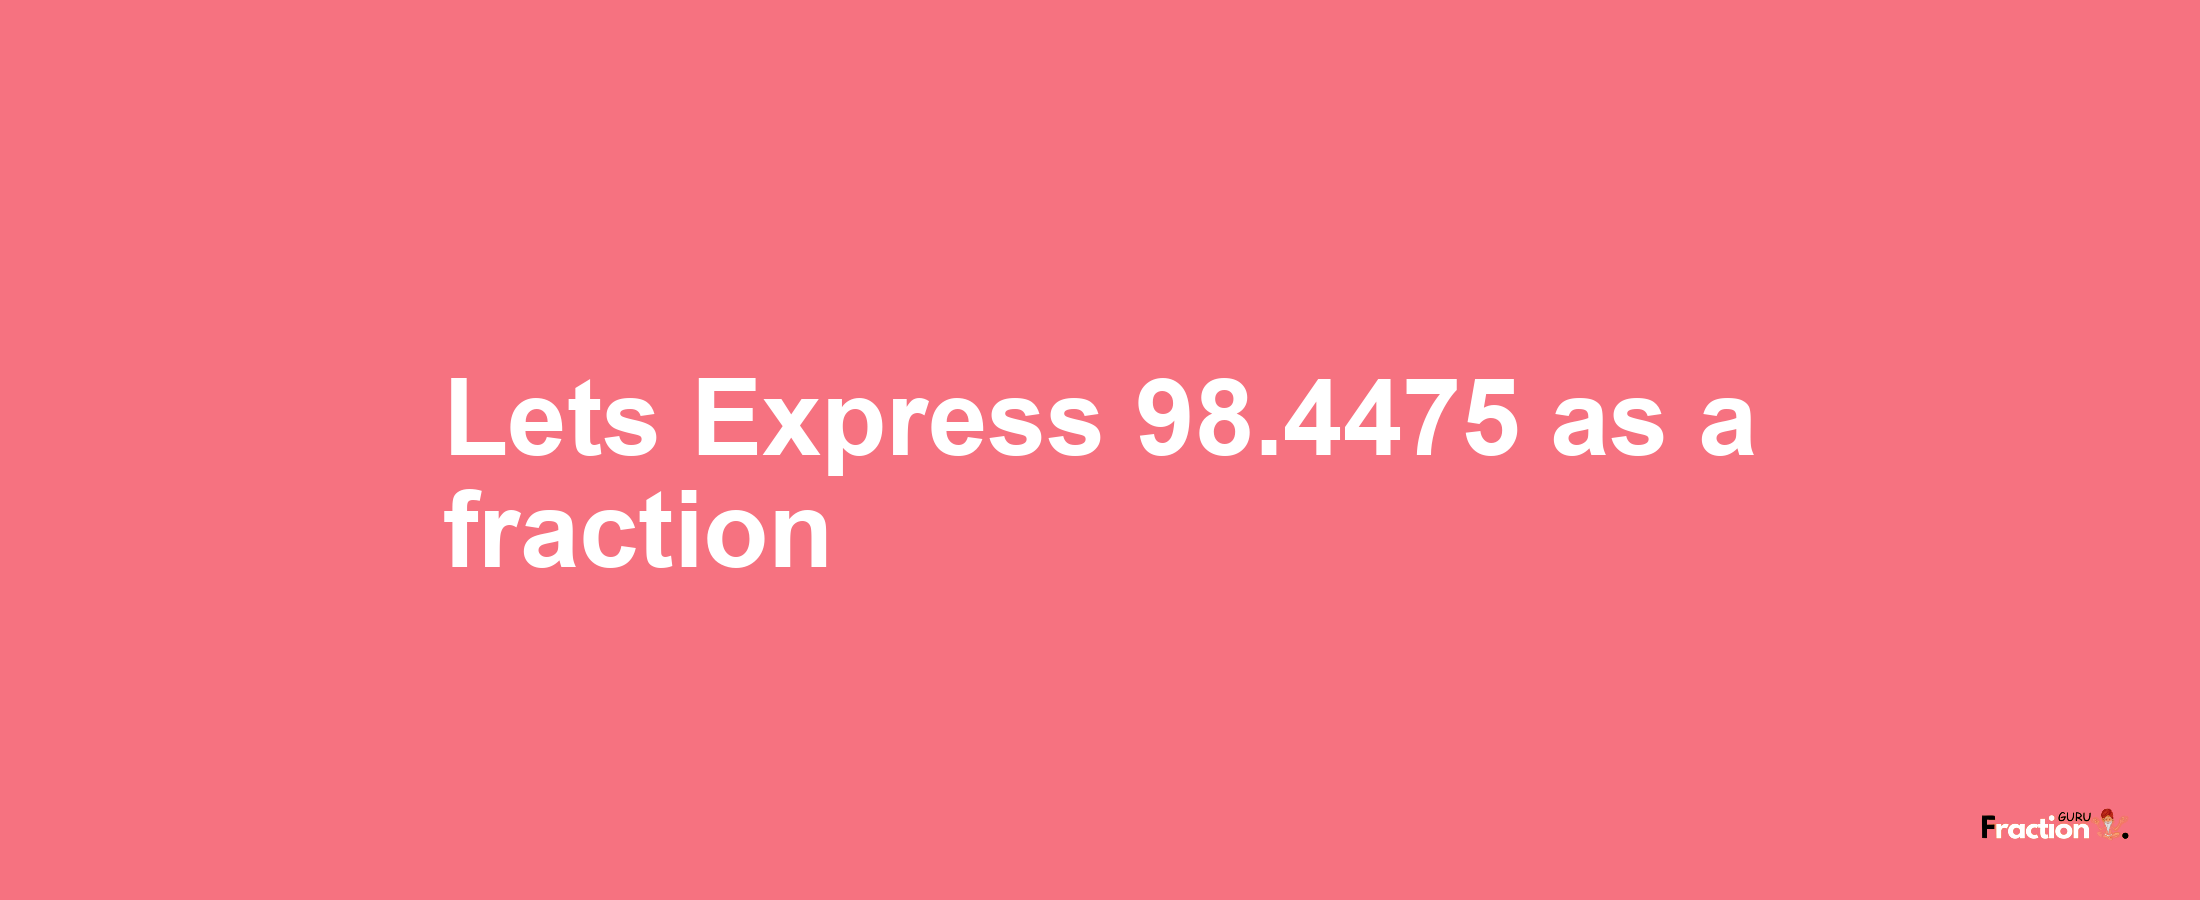 Lets Express 98.4475 as afraction